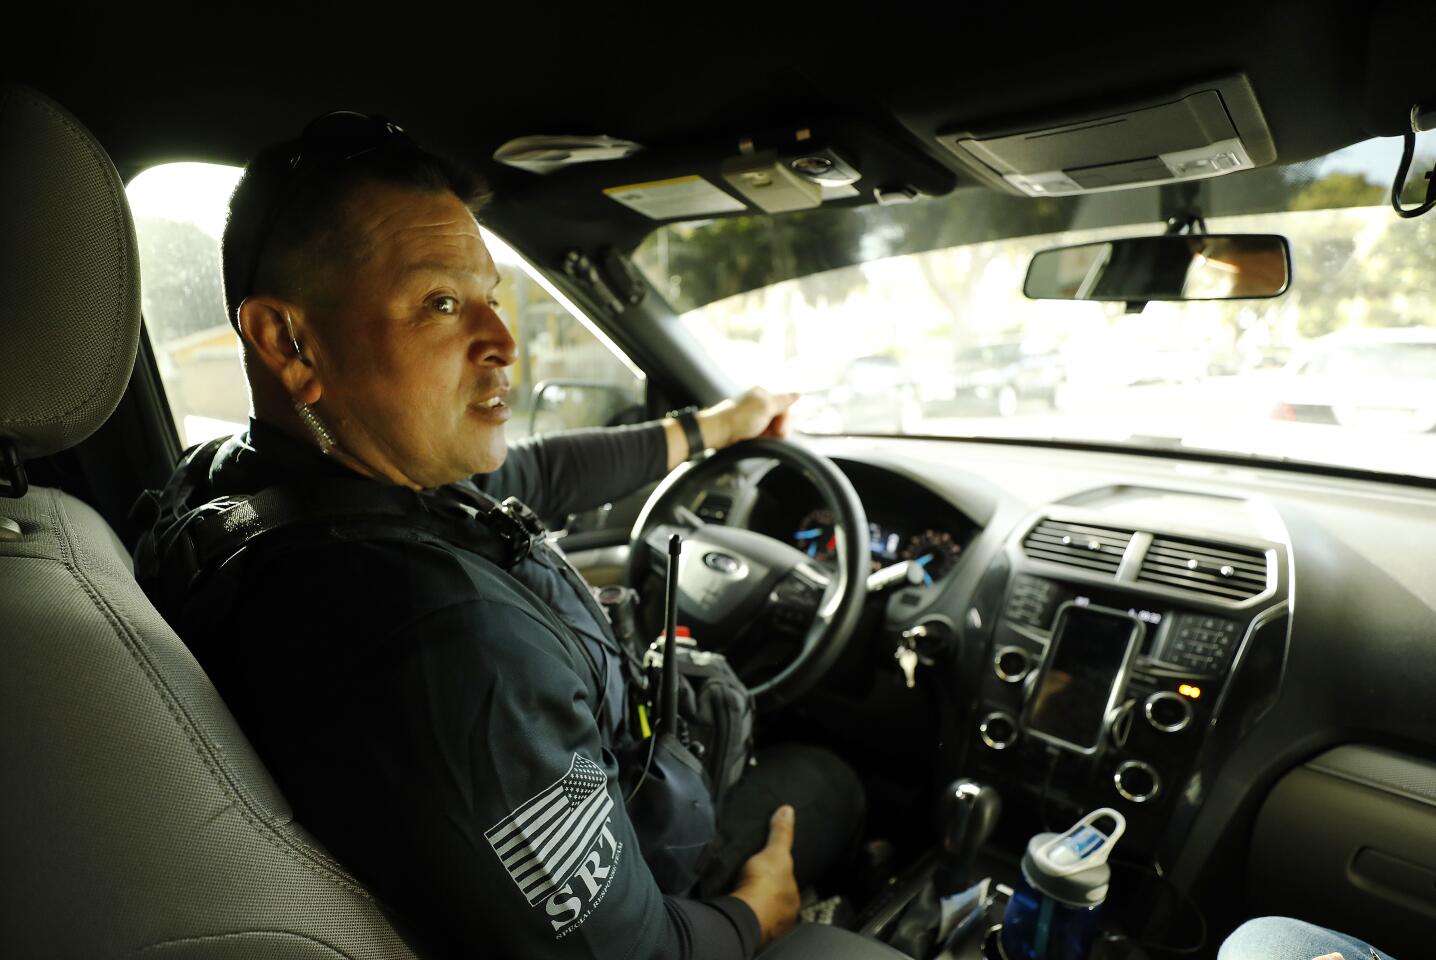 A law enforcement officer at the wheel